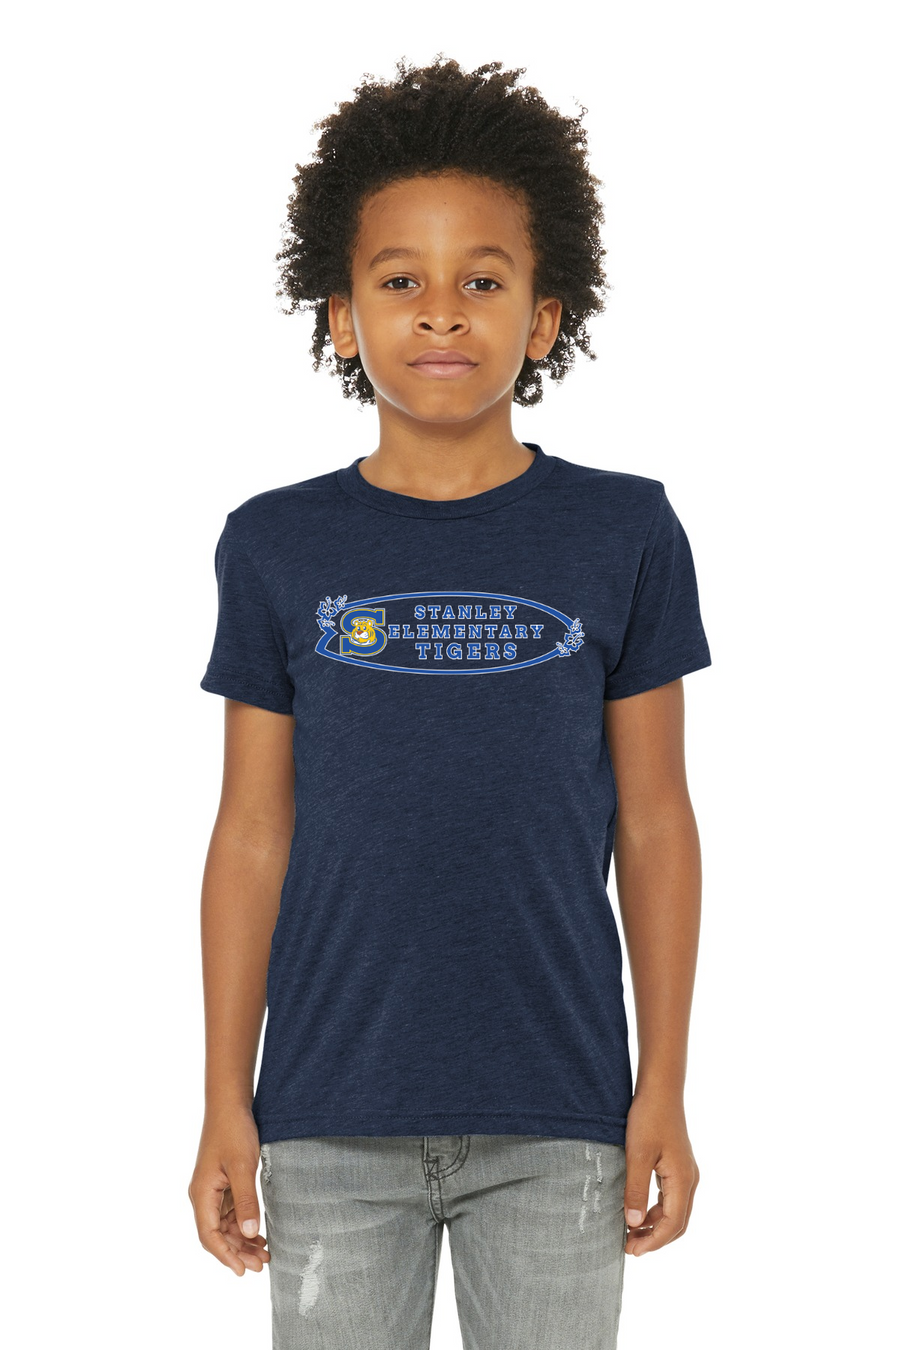 The Tiger Store - Stanley Elementary 2023/24 On-Demand-BELLA+CANVAS Triblend Short Sleeve Tee Surf Board Logo